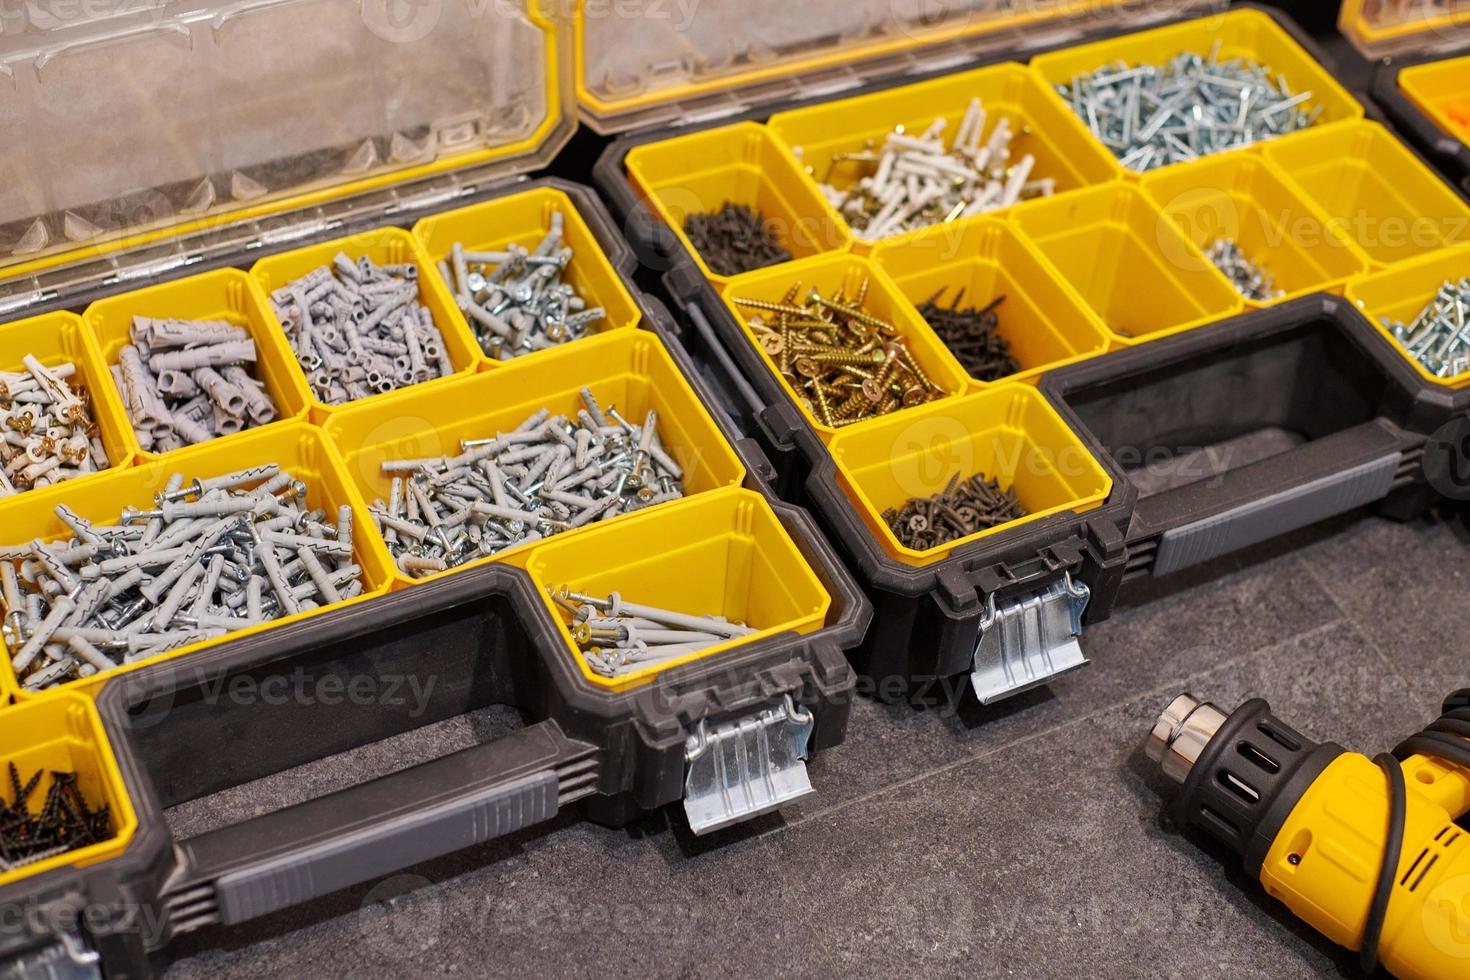 Storage boxes on floor with screws, nuts, bolts, nails and other small tools for handyman, close up photo